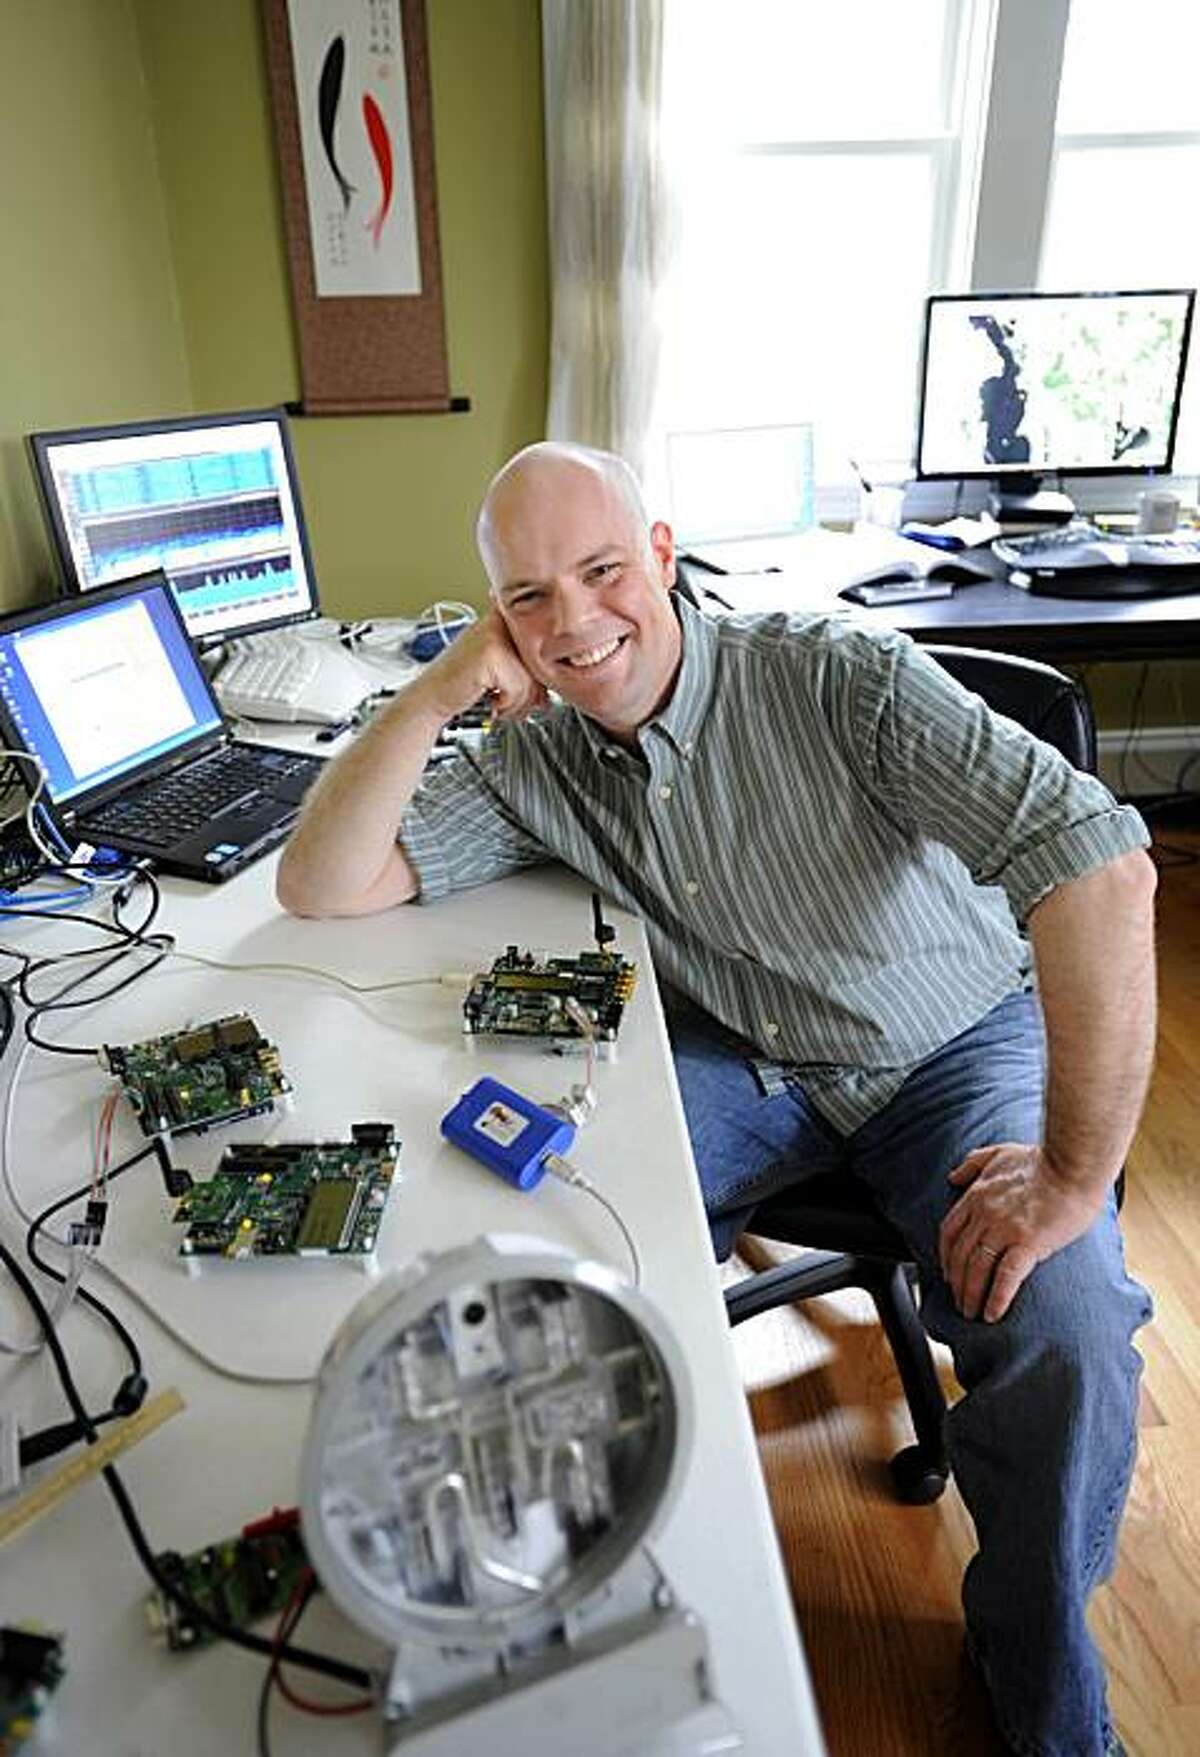 Joshua Wright, a senior security analyst for InGuardians, poses for a portrait with his hacking tools in his office in East Providence, R.I., Friday, March 26, 2010. InGuardians, which was hired by three utility companies, found flaws in new "smart" meters being installed at homes and businesses across the U.S.